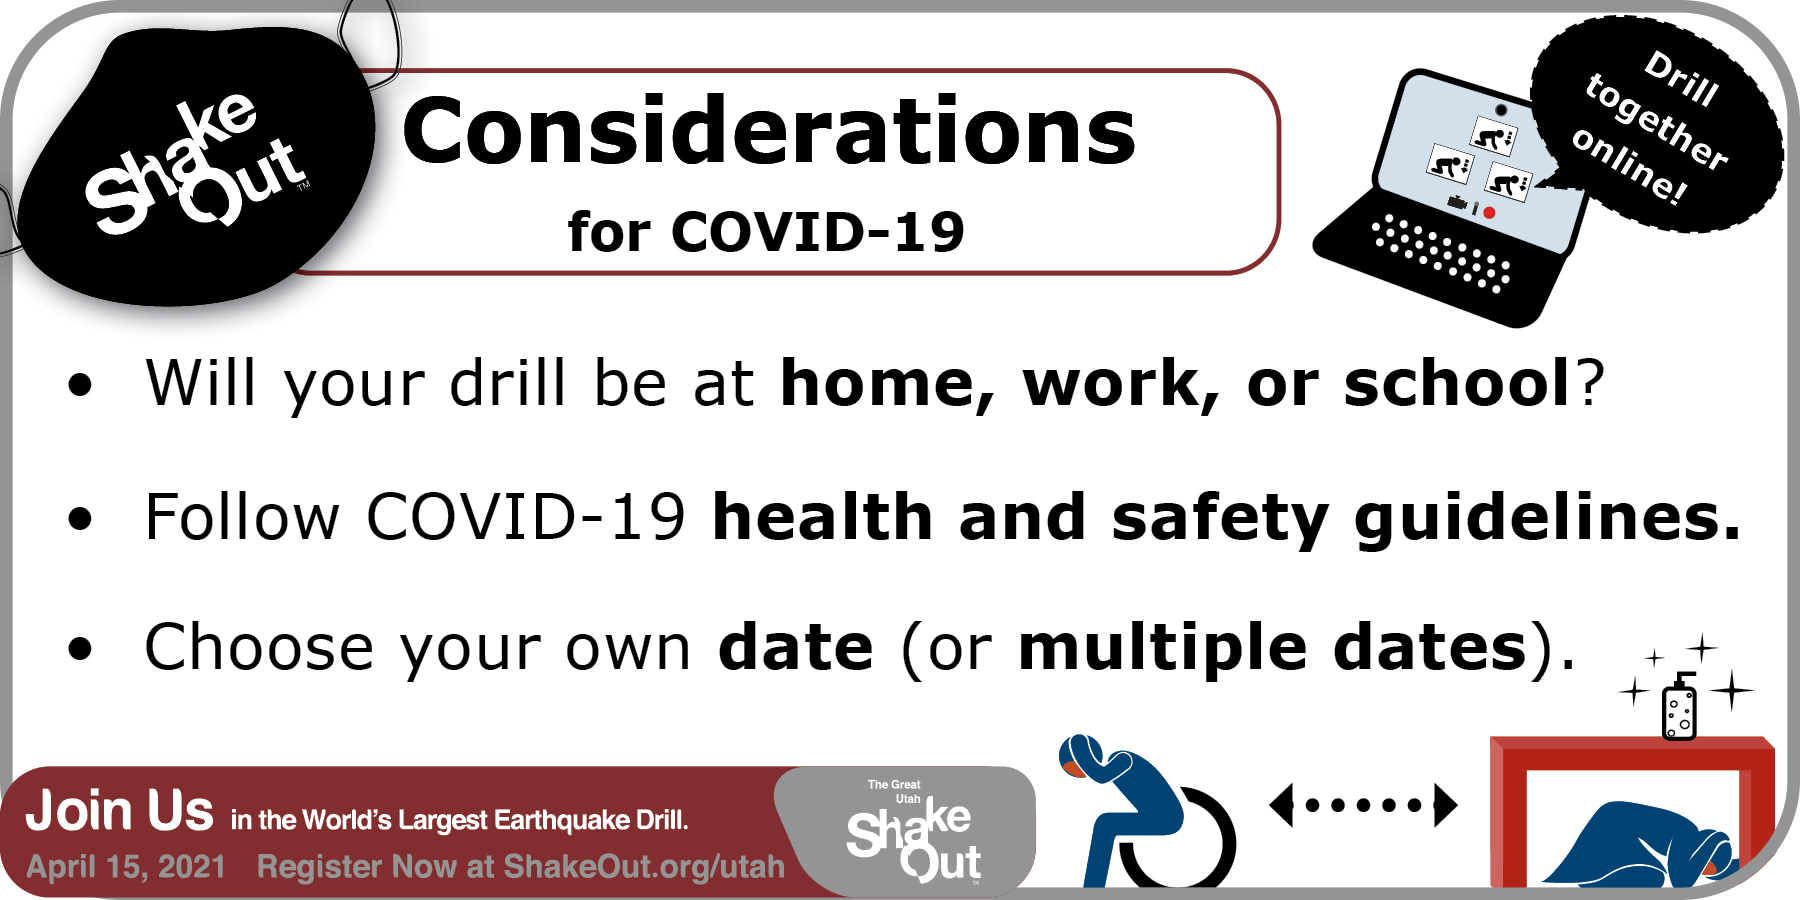 ShakeOut Considerations for COVID-19- where and when will your drill be held? Will you drill together online? If in person, follow health and safety guidelines.